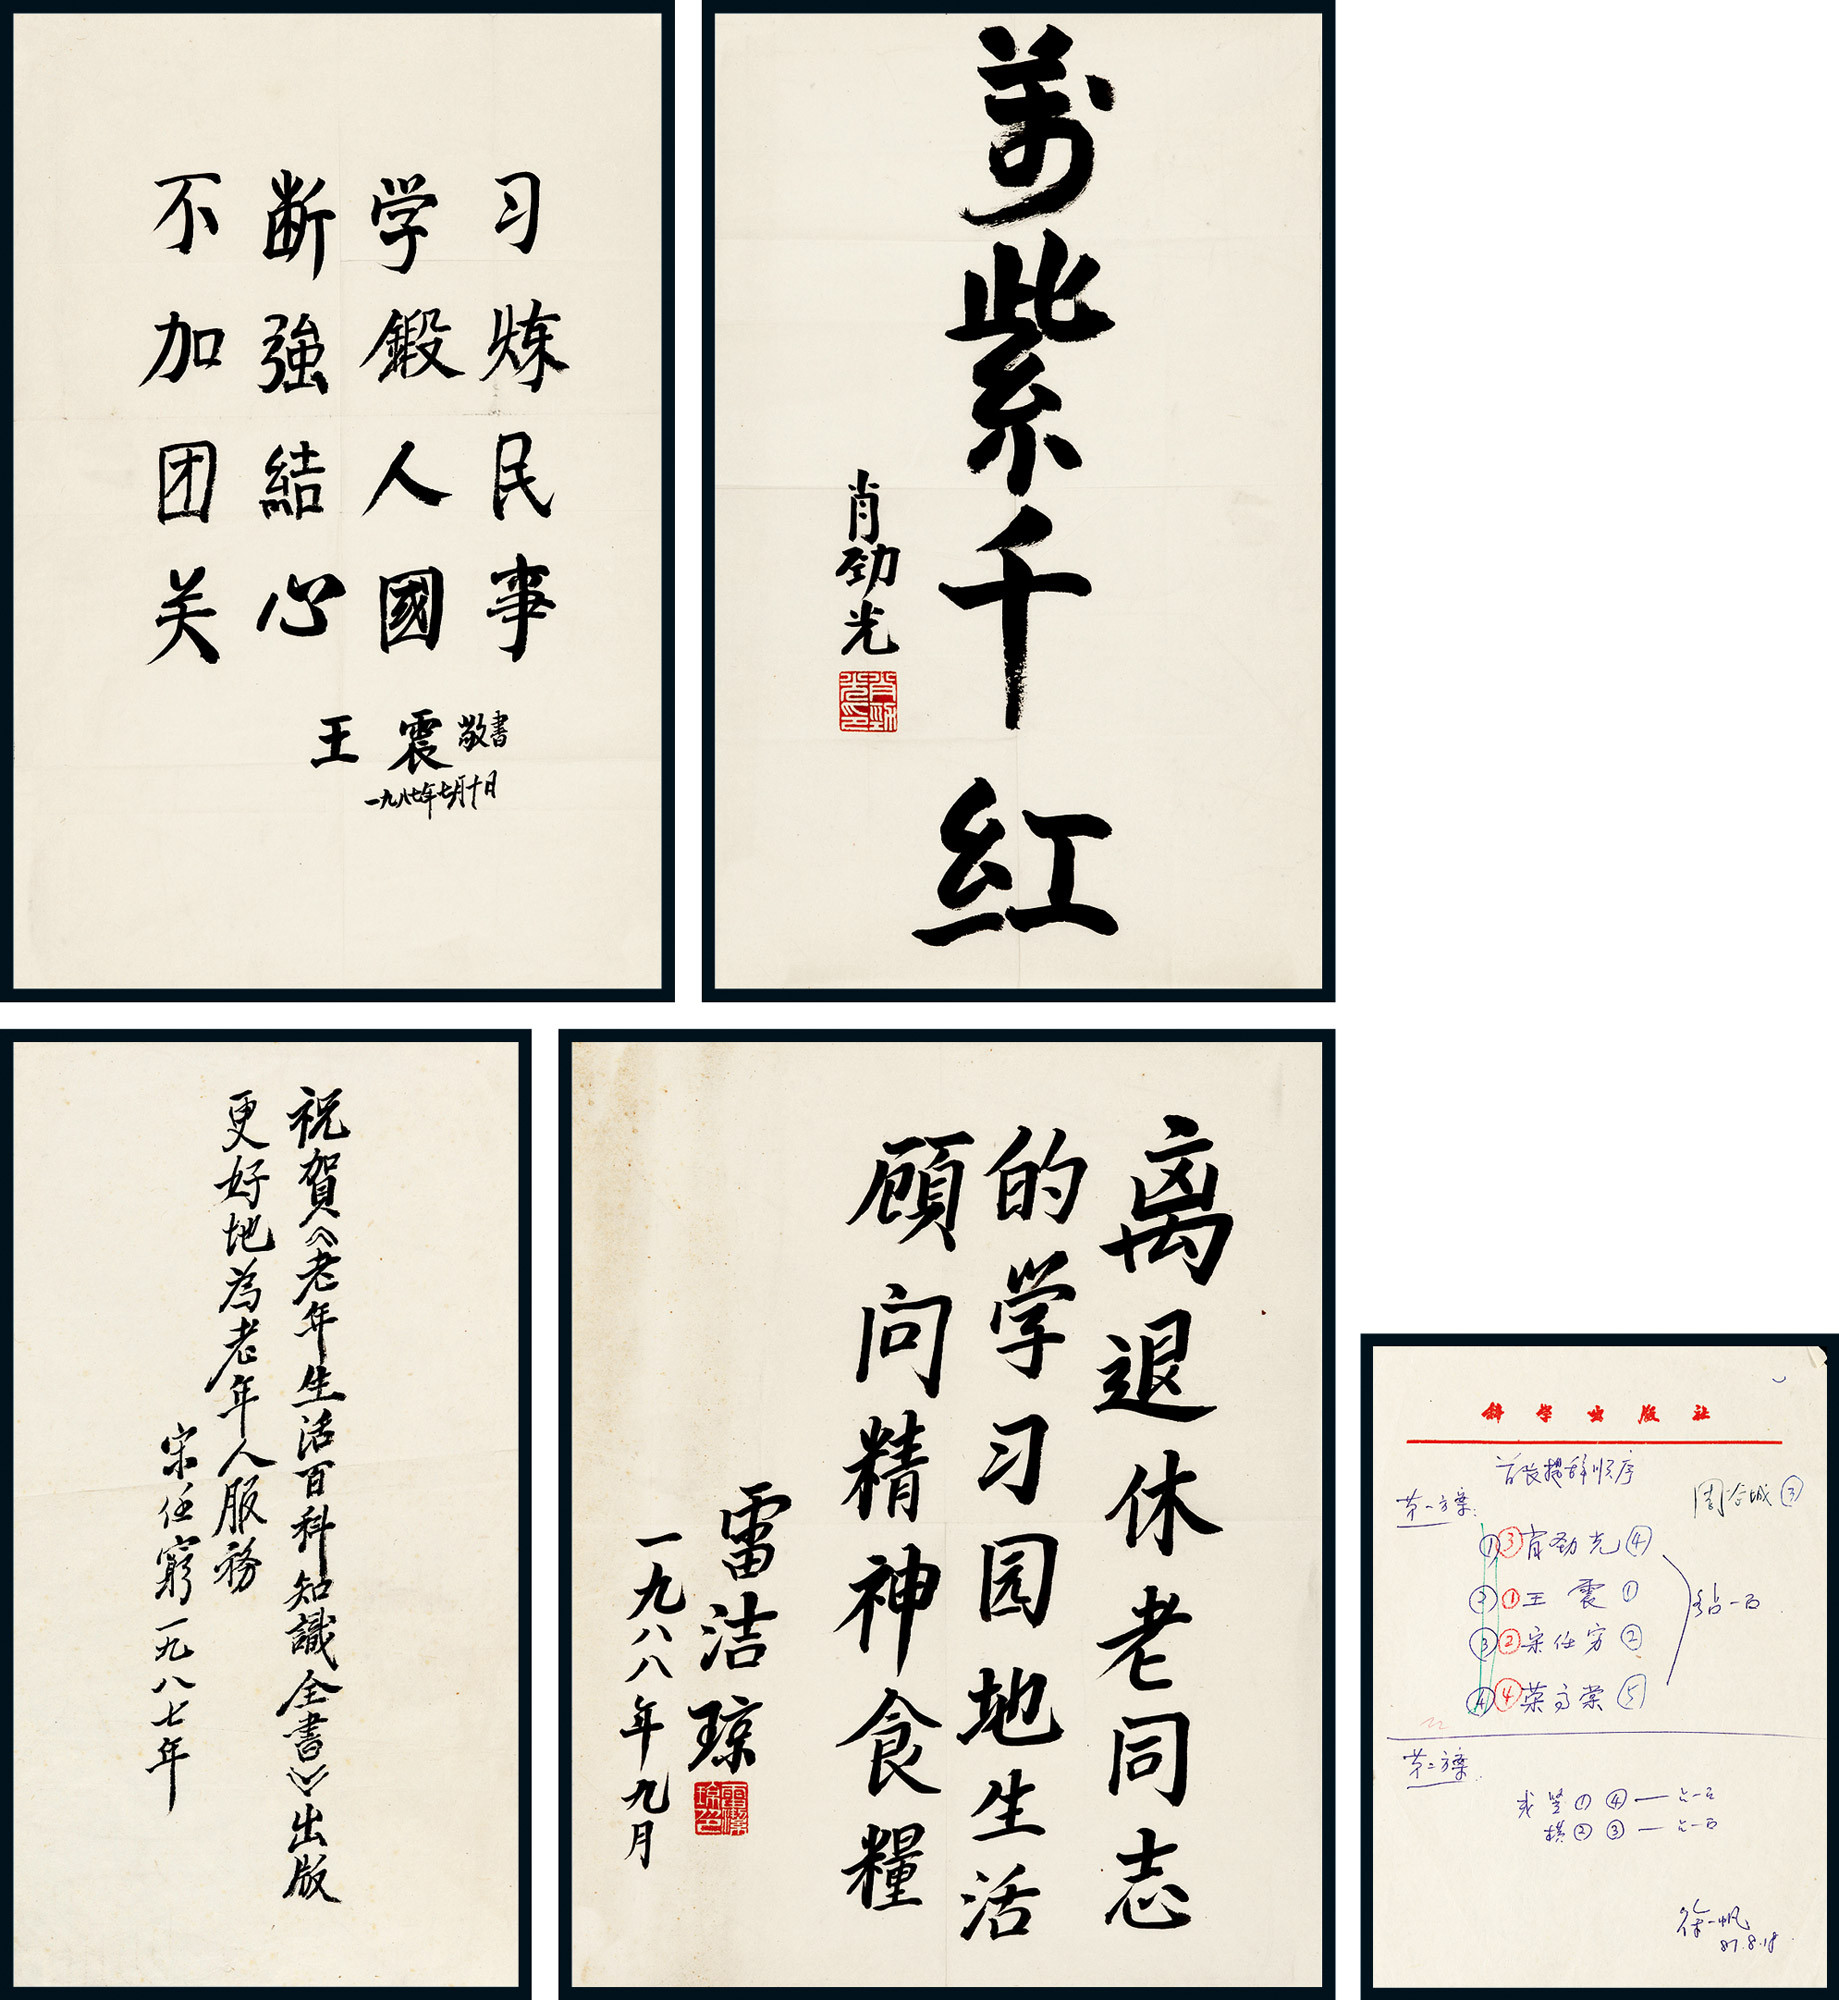 Related inscriptions and calligraphy of Science Press 4 pieces in 1 set